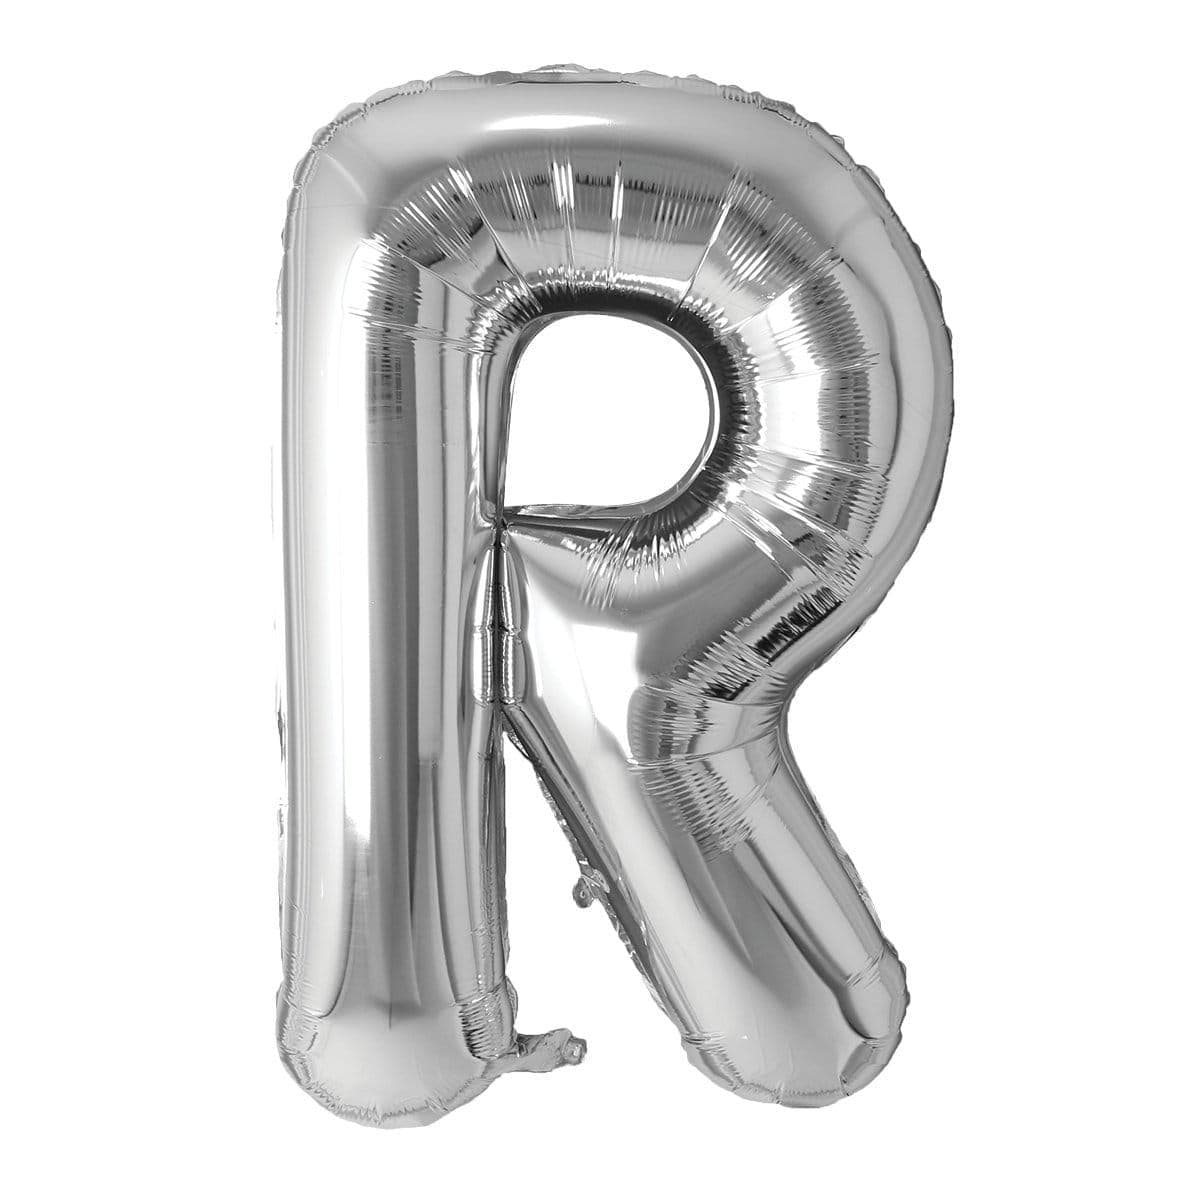 Buy Balloons Silver Letter R Foil Balloon, 34 Inches sold at Party Expert